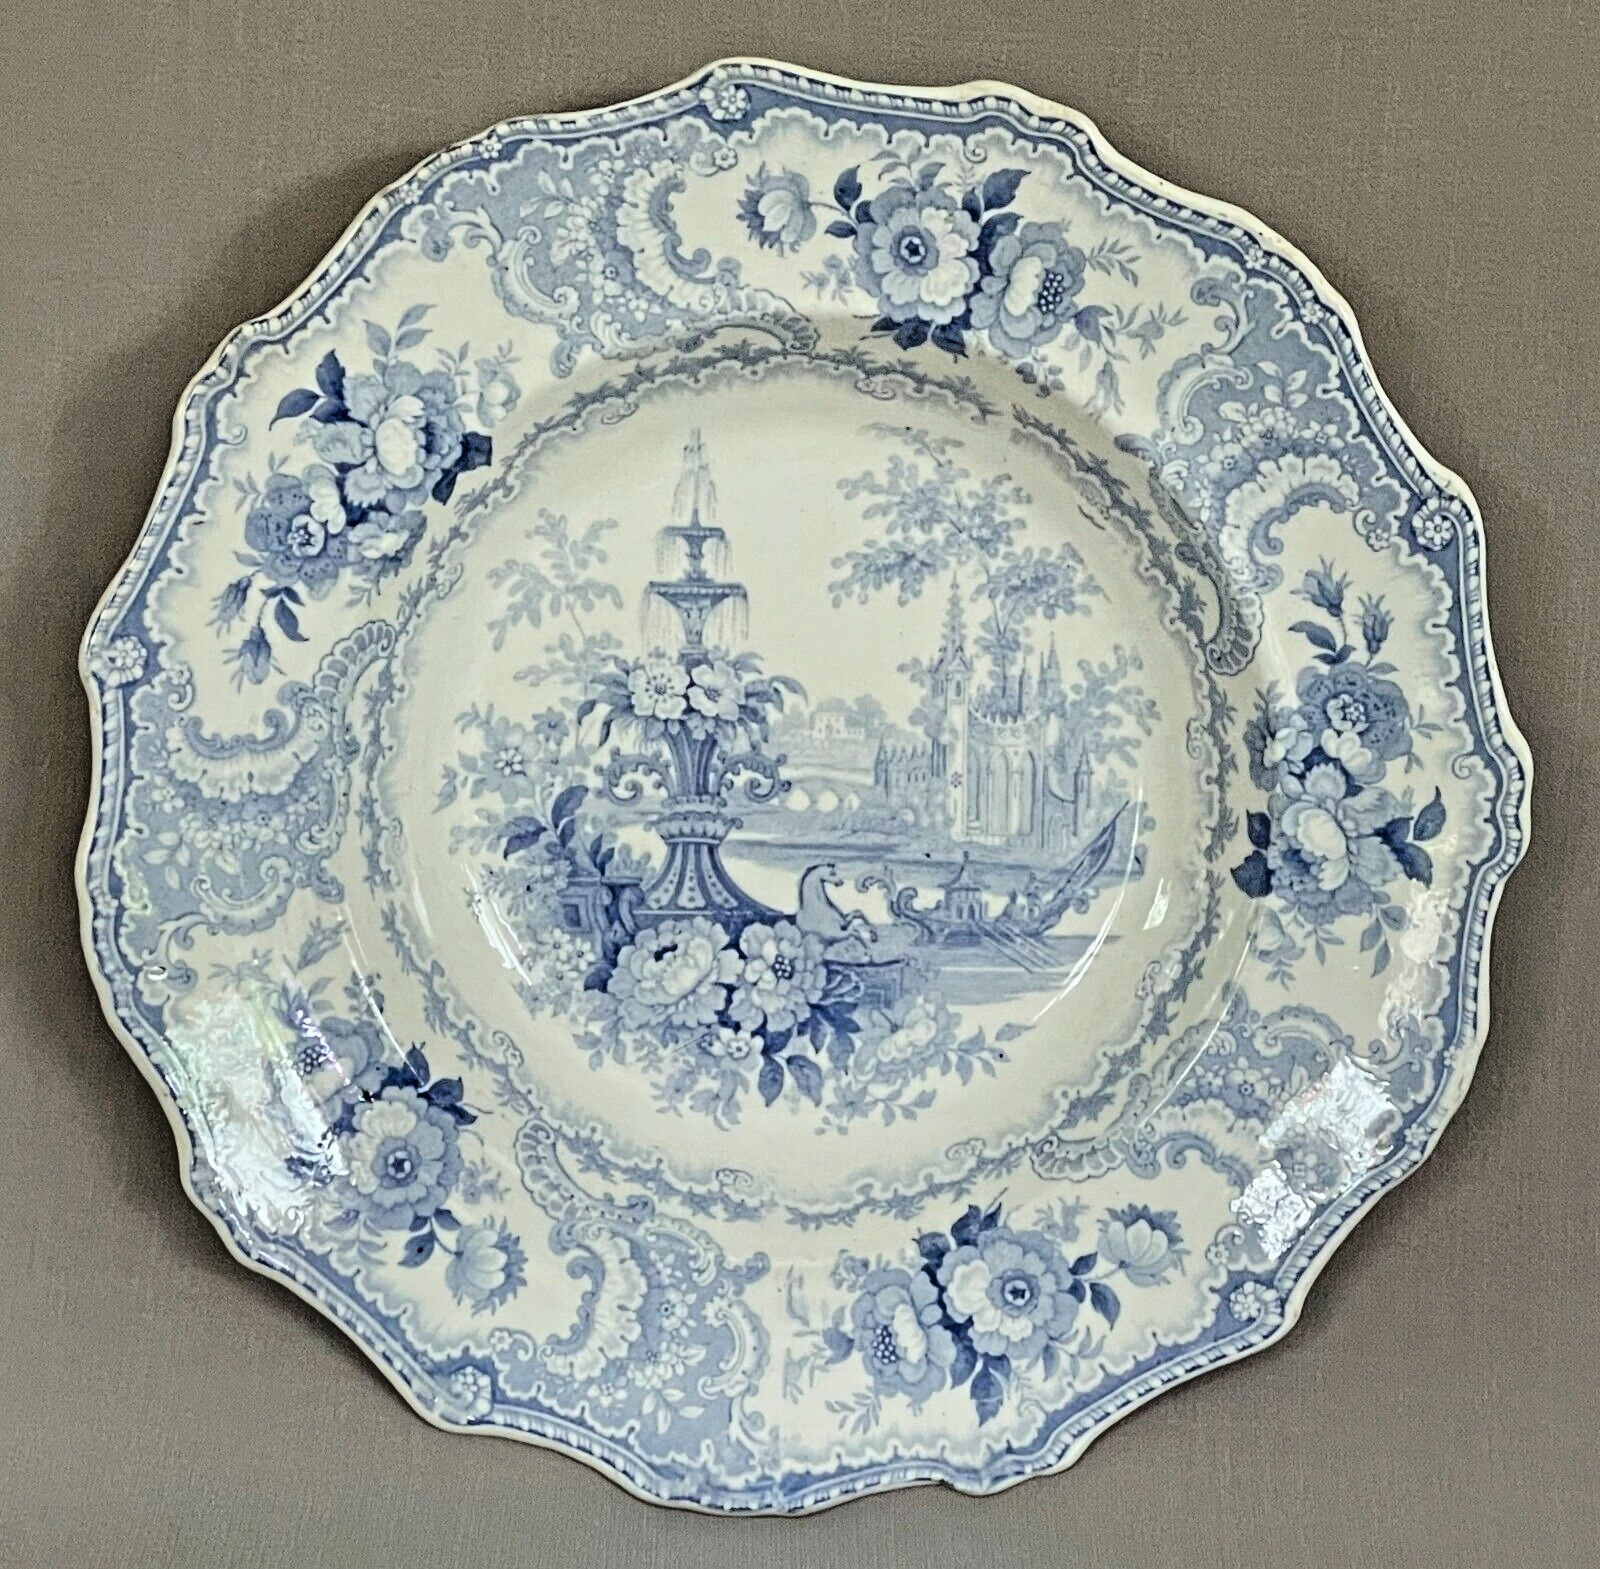 Rare Early 19th Century Antique Blue Transfer Soup Plate - 'Fountain Scenery'